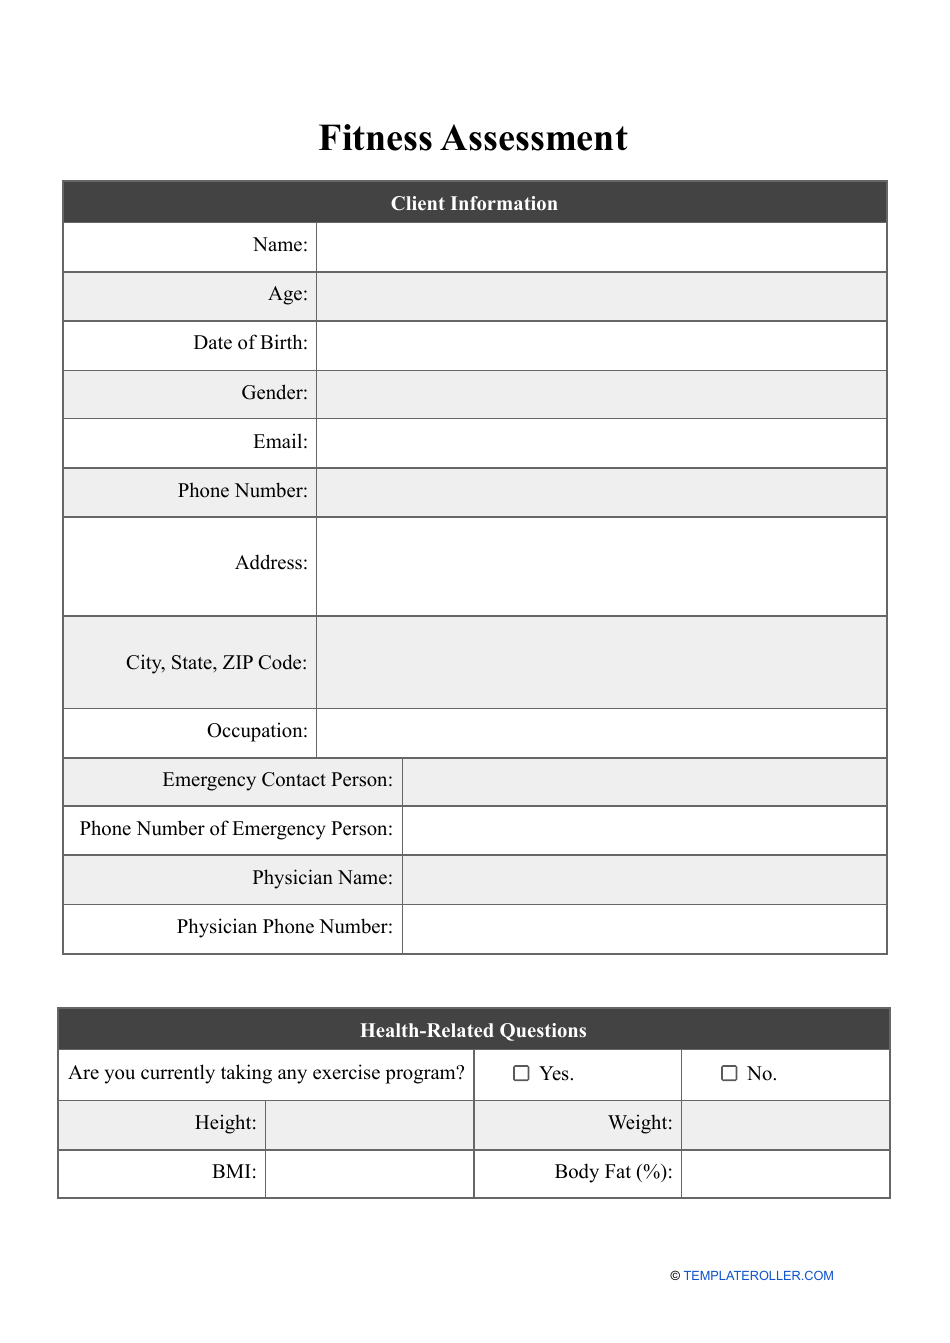 Fitness Assessment Template for complete evaluation of an individual's fitness levels and overall wellness.